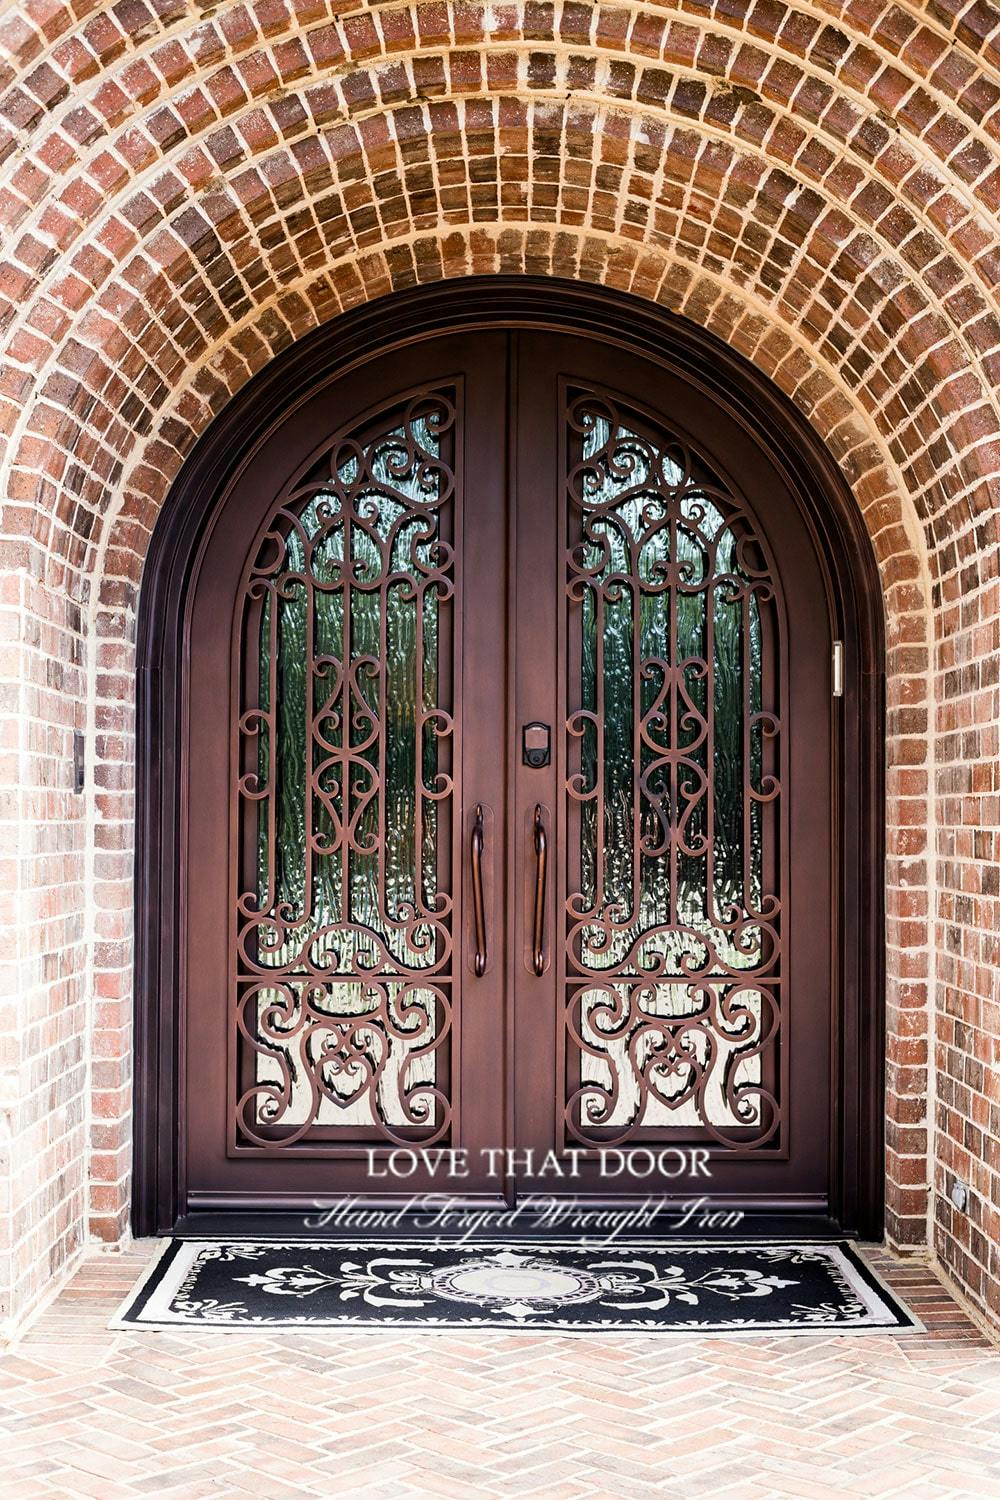 Stylish iron double doors with intricate metalwork and glass panels